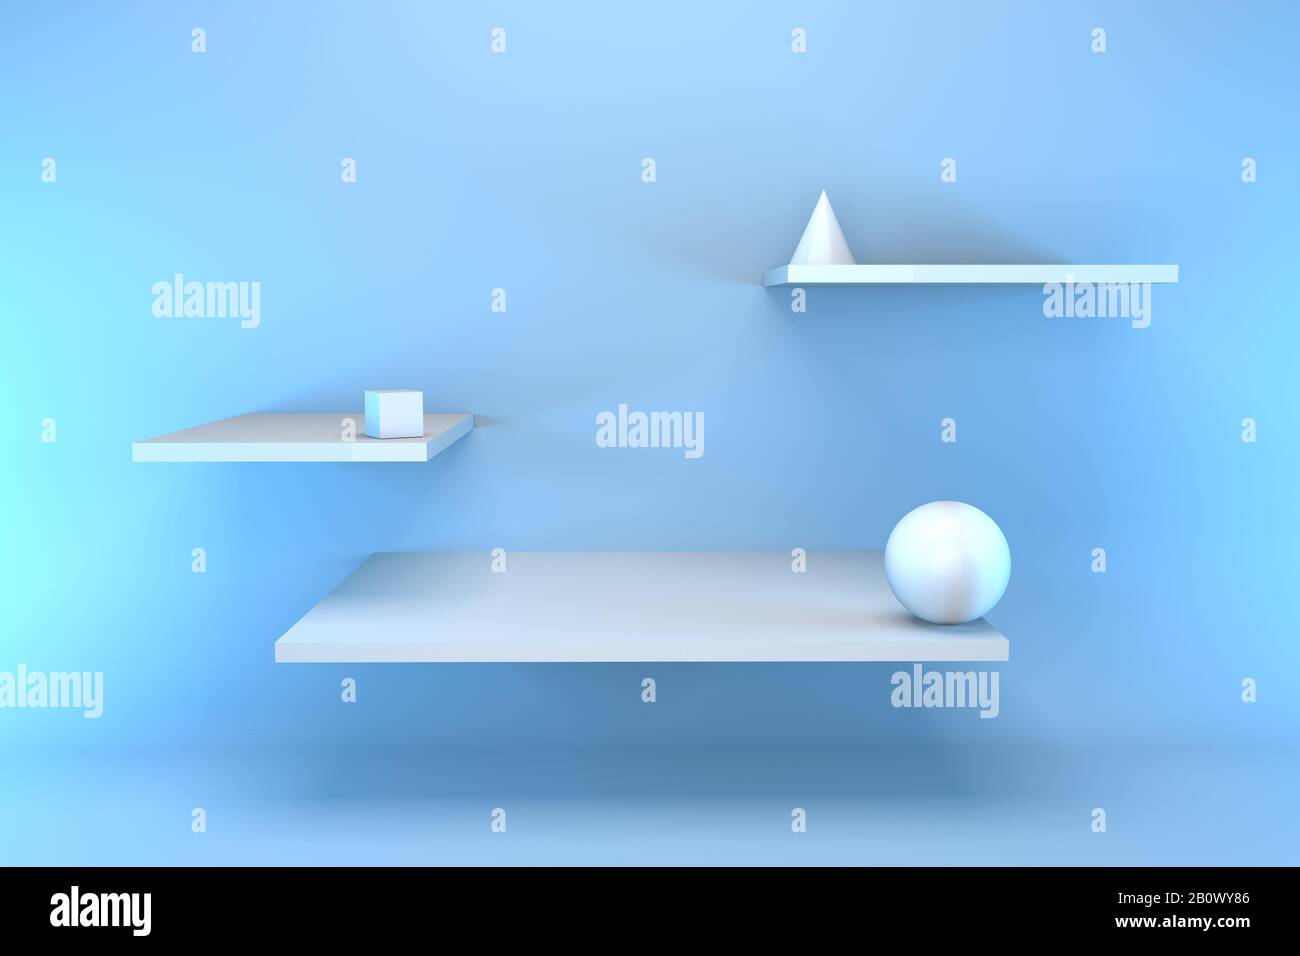 3d render shelves with abstract geometric white shapes on a blue background. Minimalistic podium concept Stock Photo